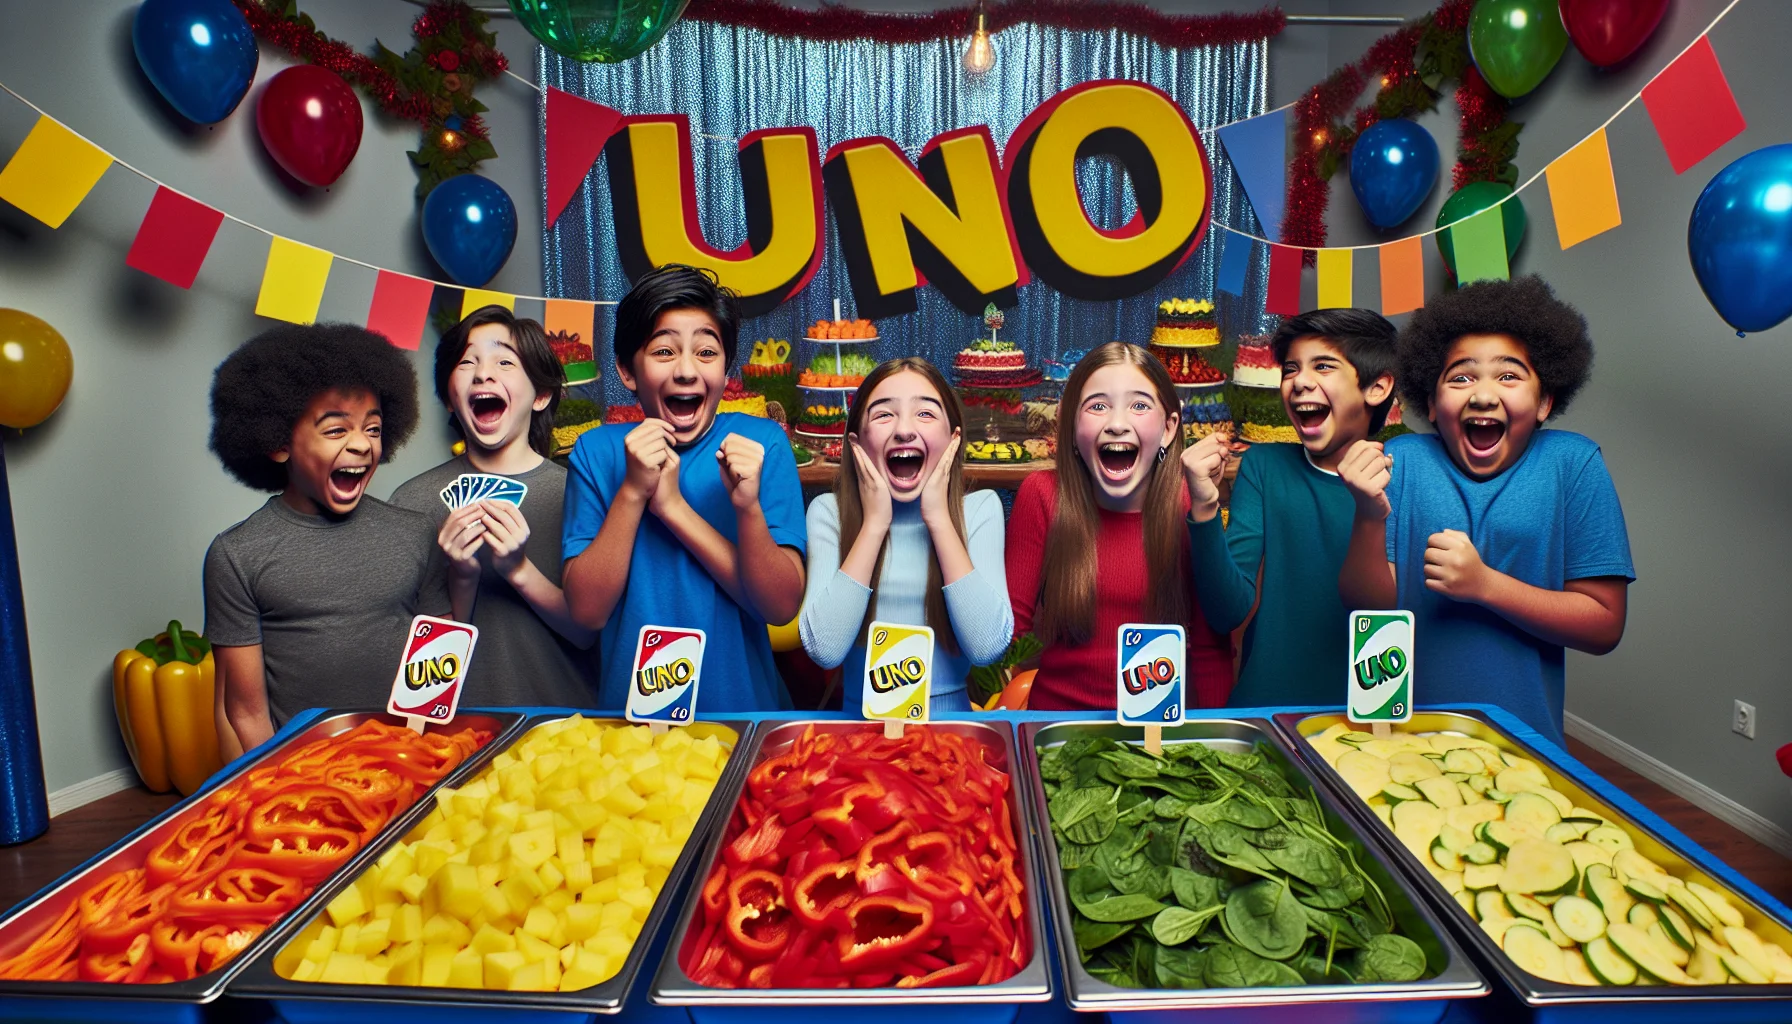 Picture a hilarious scene at an Uno-themed birthday party. The food table is extravagantly decked out with vibrant, healthy dishes corresponding to the colors of Uno cards: bright red bell pepper slices, sunny yellow pineapple chunks, lush green spinach salads, and deep blue blueberries. Each dish has a small Uno card standing in it for a touch of fun. The attendees, a diverse group of children of various genders - a hispanic boy, a caucasian girl, a Middle-Eastern boy and a South Asian girl - are laughing and pointing, wide-eyed, at the price tags which amusingly show very low costs. The setting promotes a lively and comedic atmosphere encouraging everyone to try these economical, nutritious party treats.